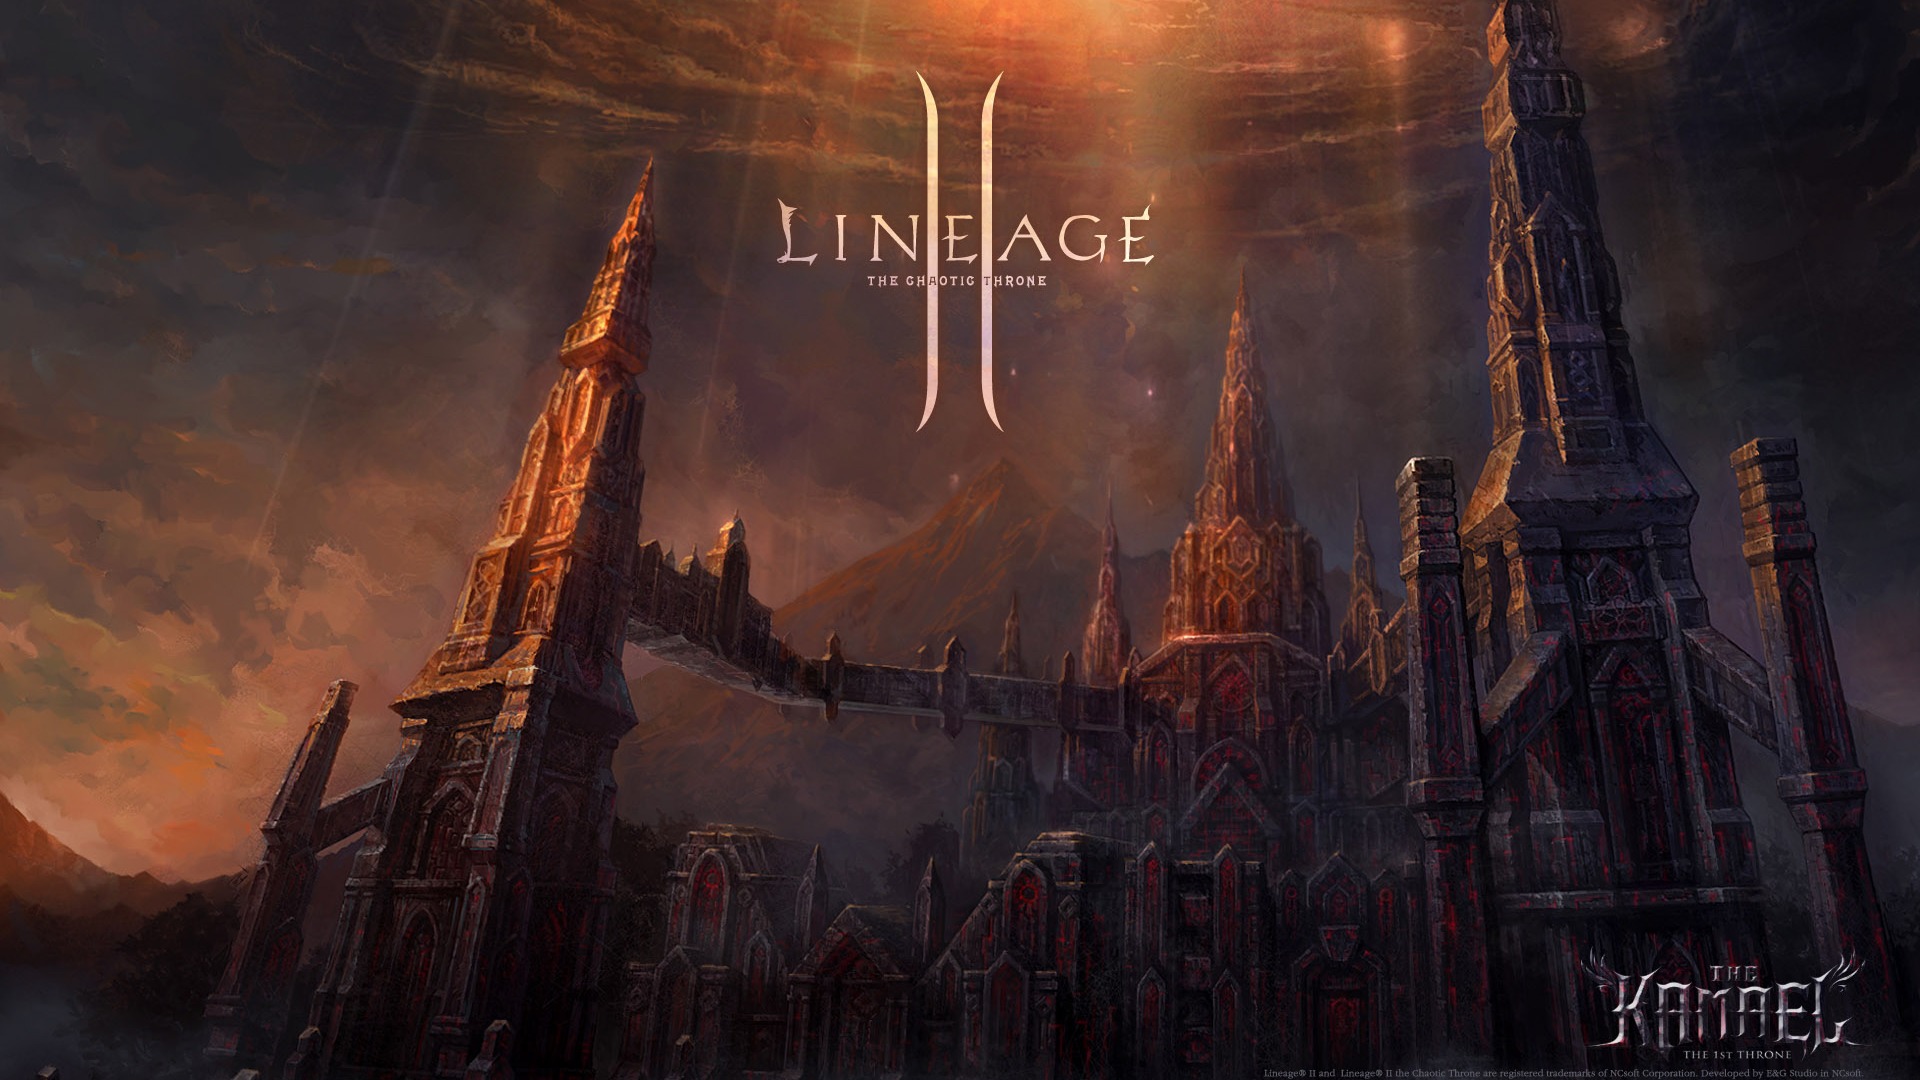 LINEAGE Ⅱ modeling HD gaming wallpapers #4 - 1920x1080